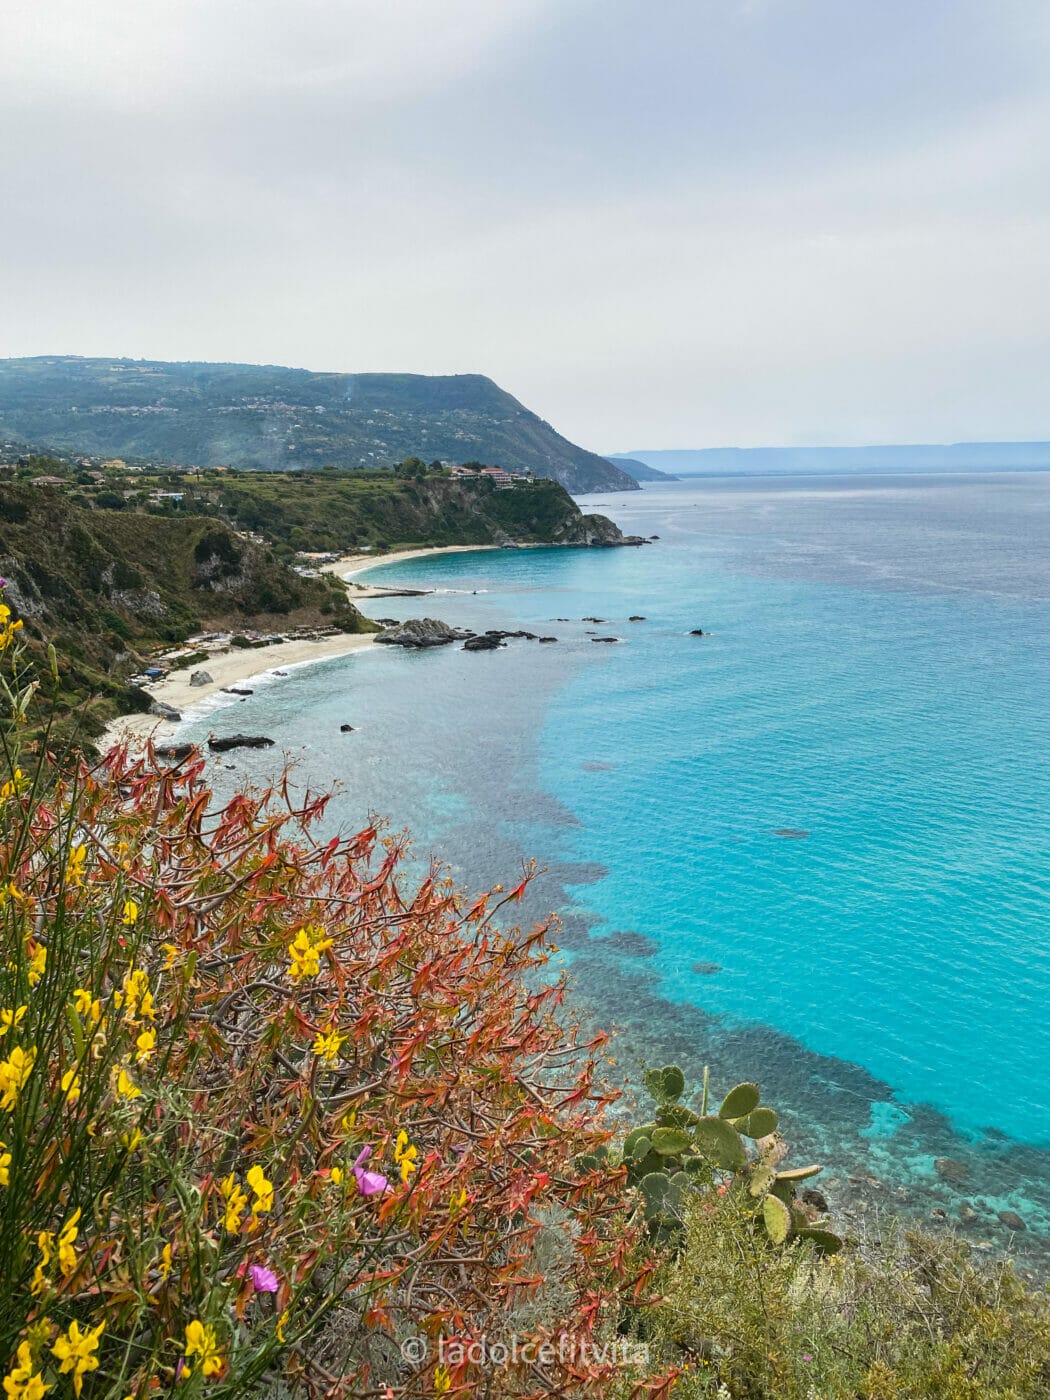 View from Panorama Point in Capo Vaticano onto stunning turquoise waters in Calabria, Italy